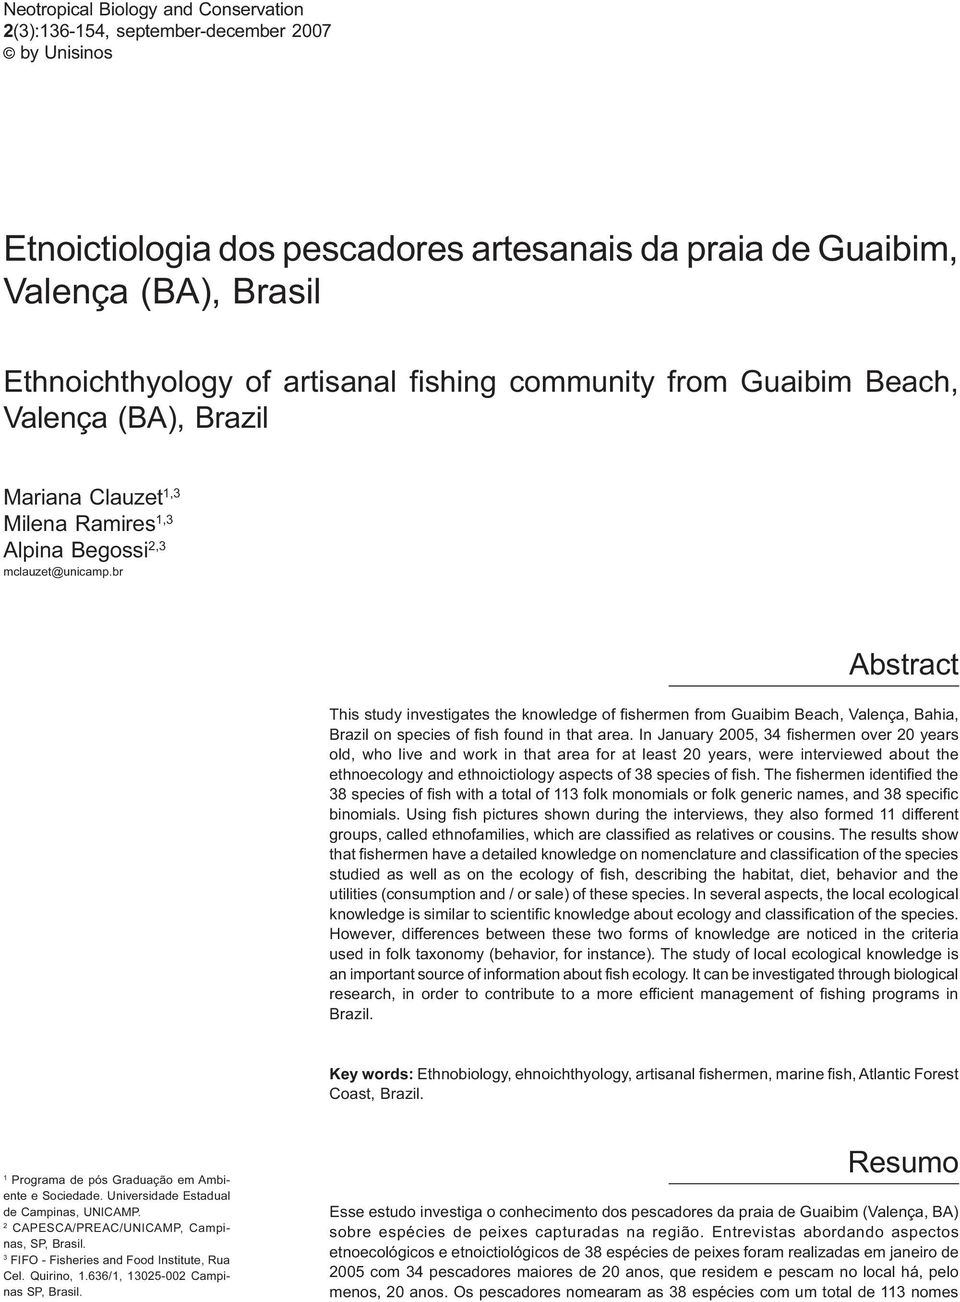 br Abstract This study investigates the knowledge of fishermen from Guaibim Beach, Valença, Bahia, Brazil on species of fish found in that area.